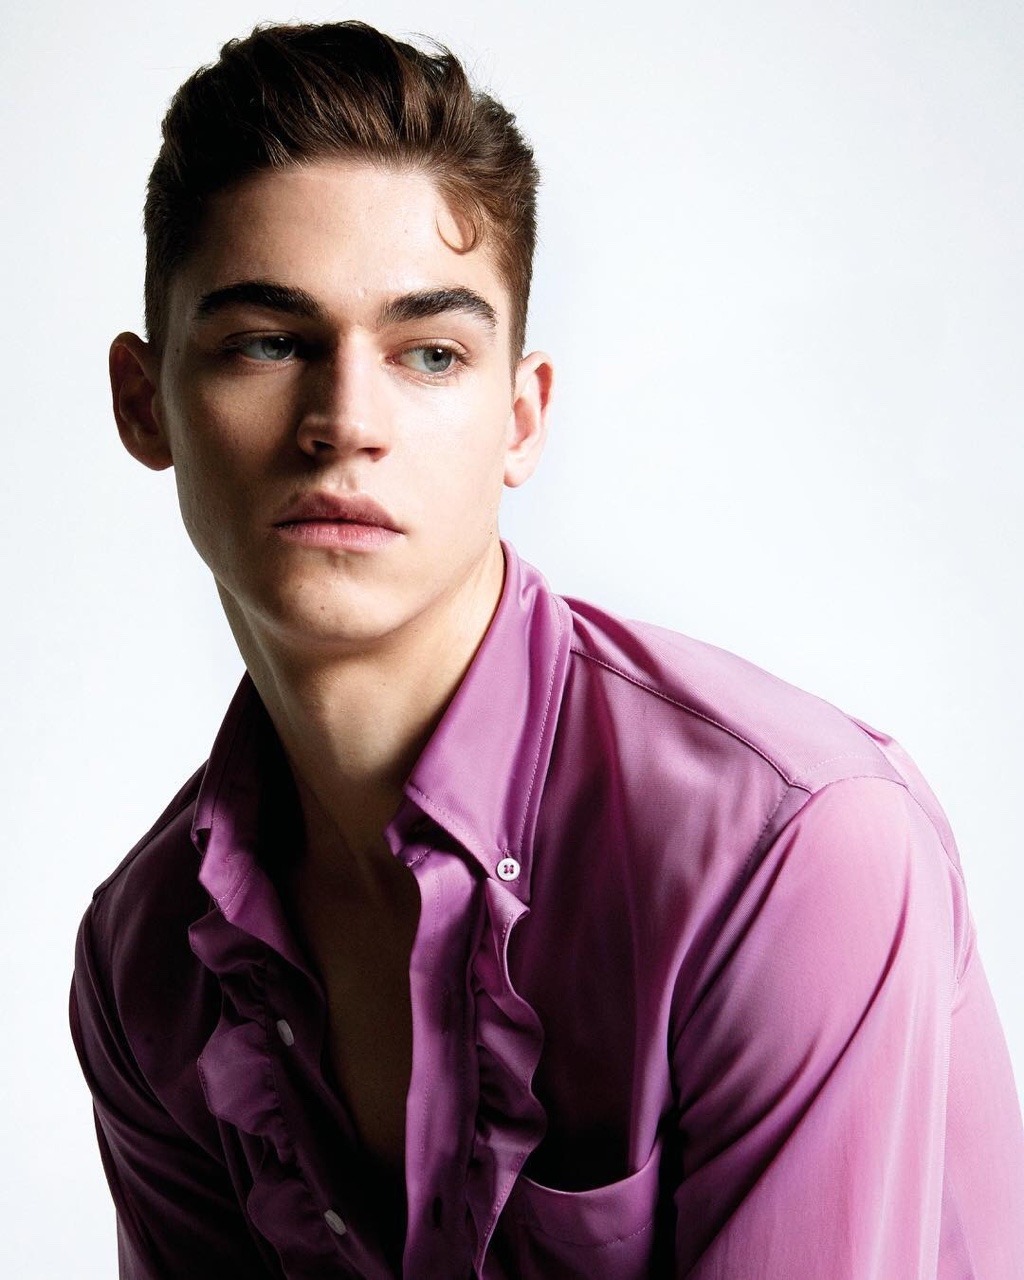 Hero Fiennes Tiffin  Hero for The Spring 19 issue of 